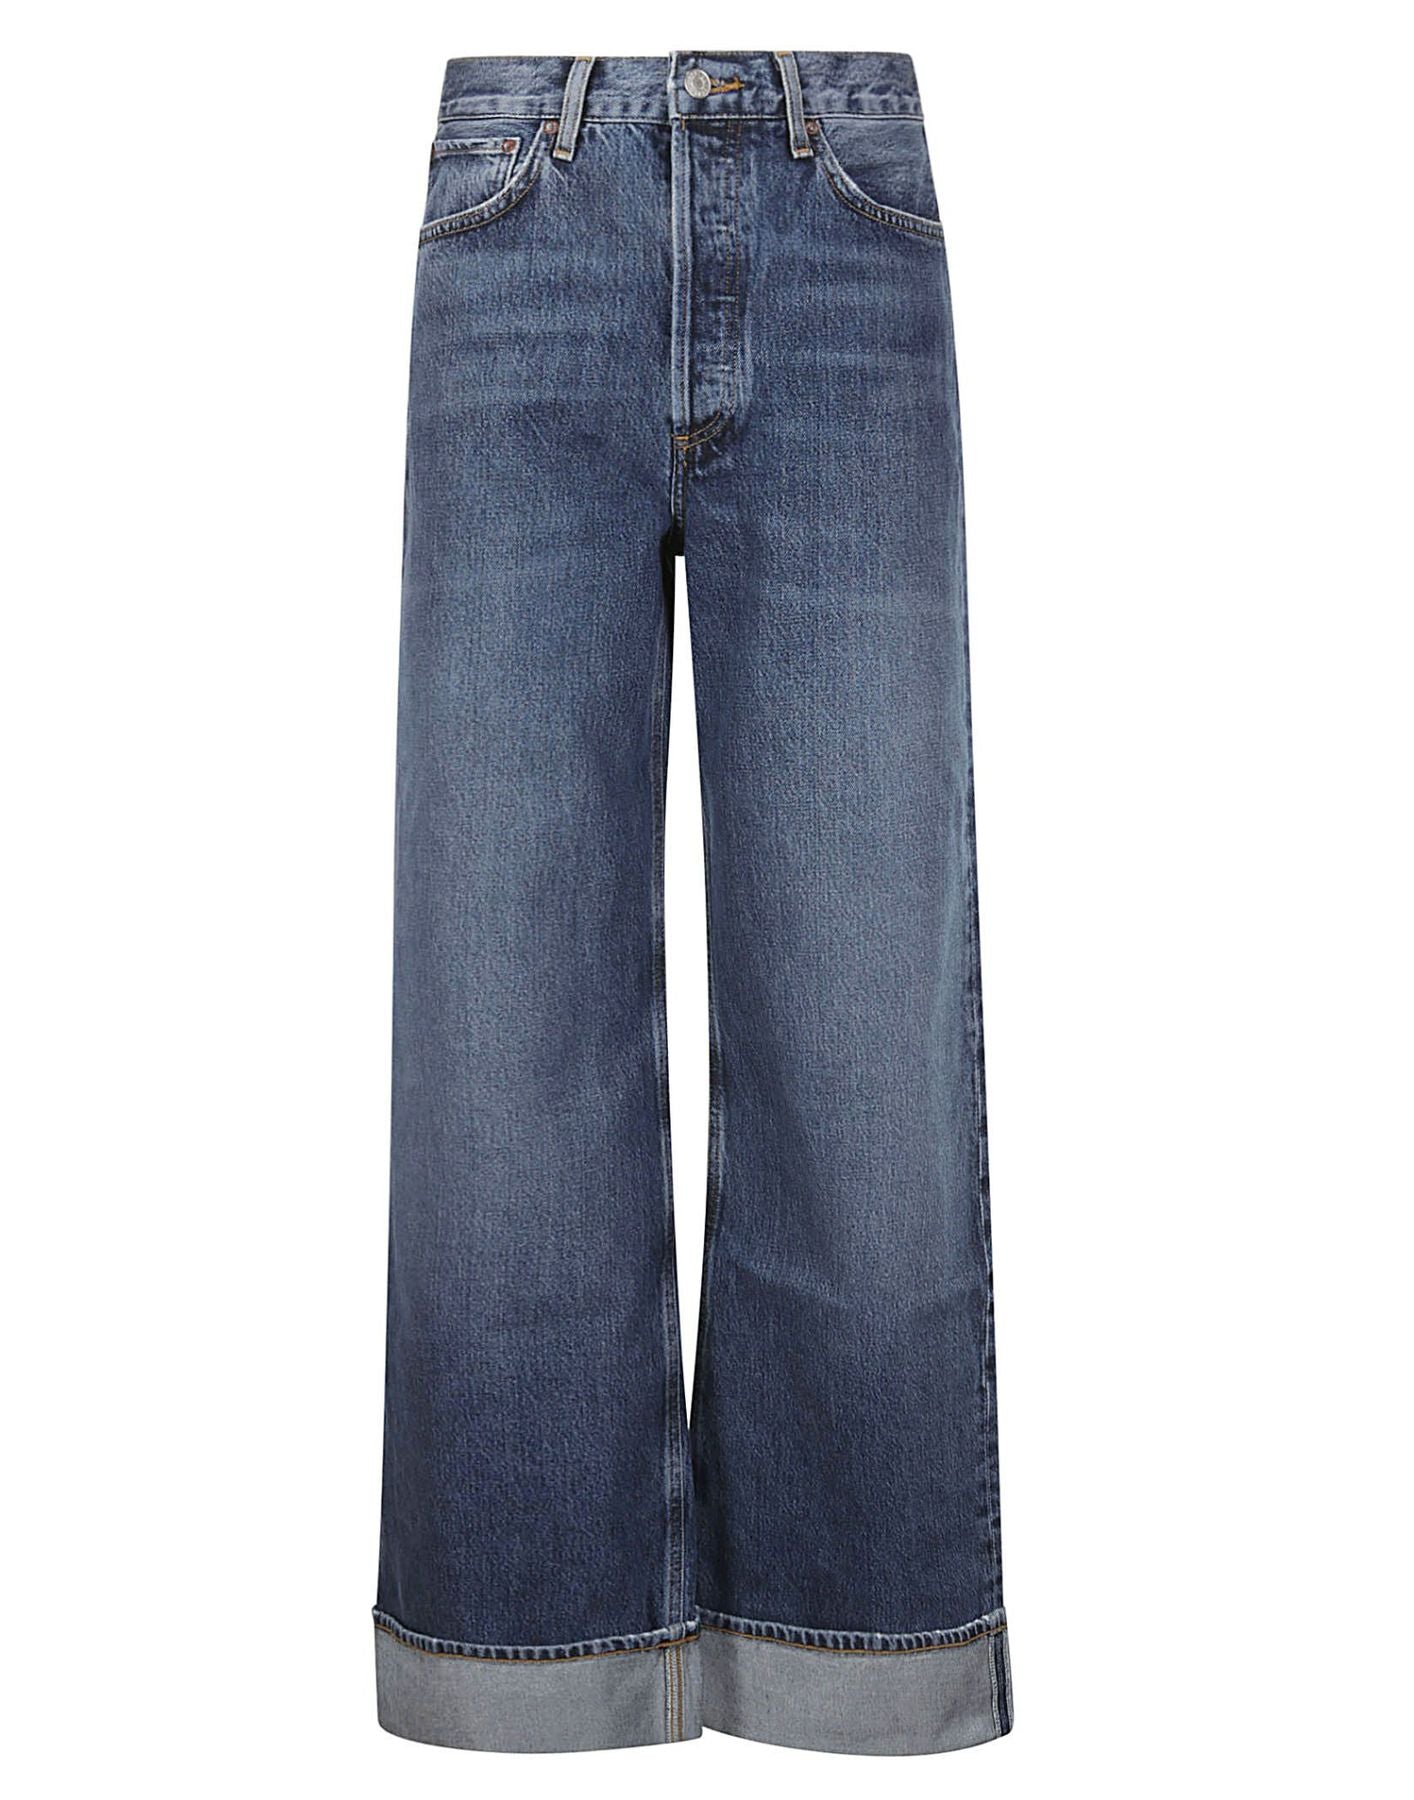 Jeans for woman A9159-1206 CONTROL Agolde